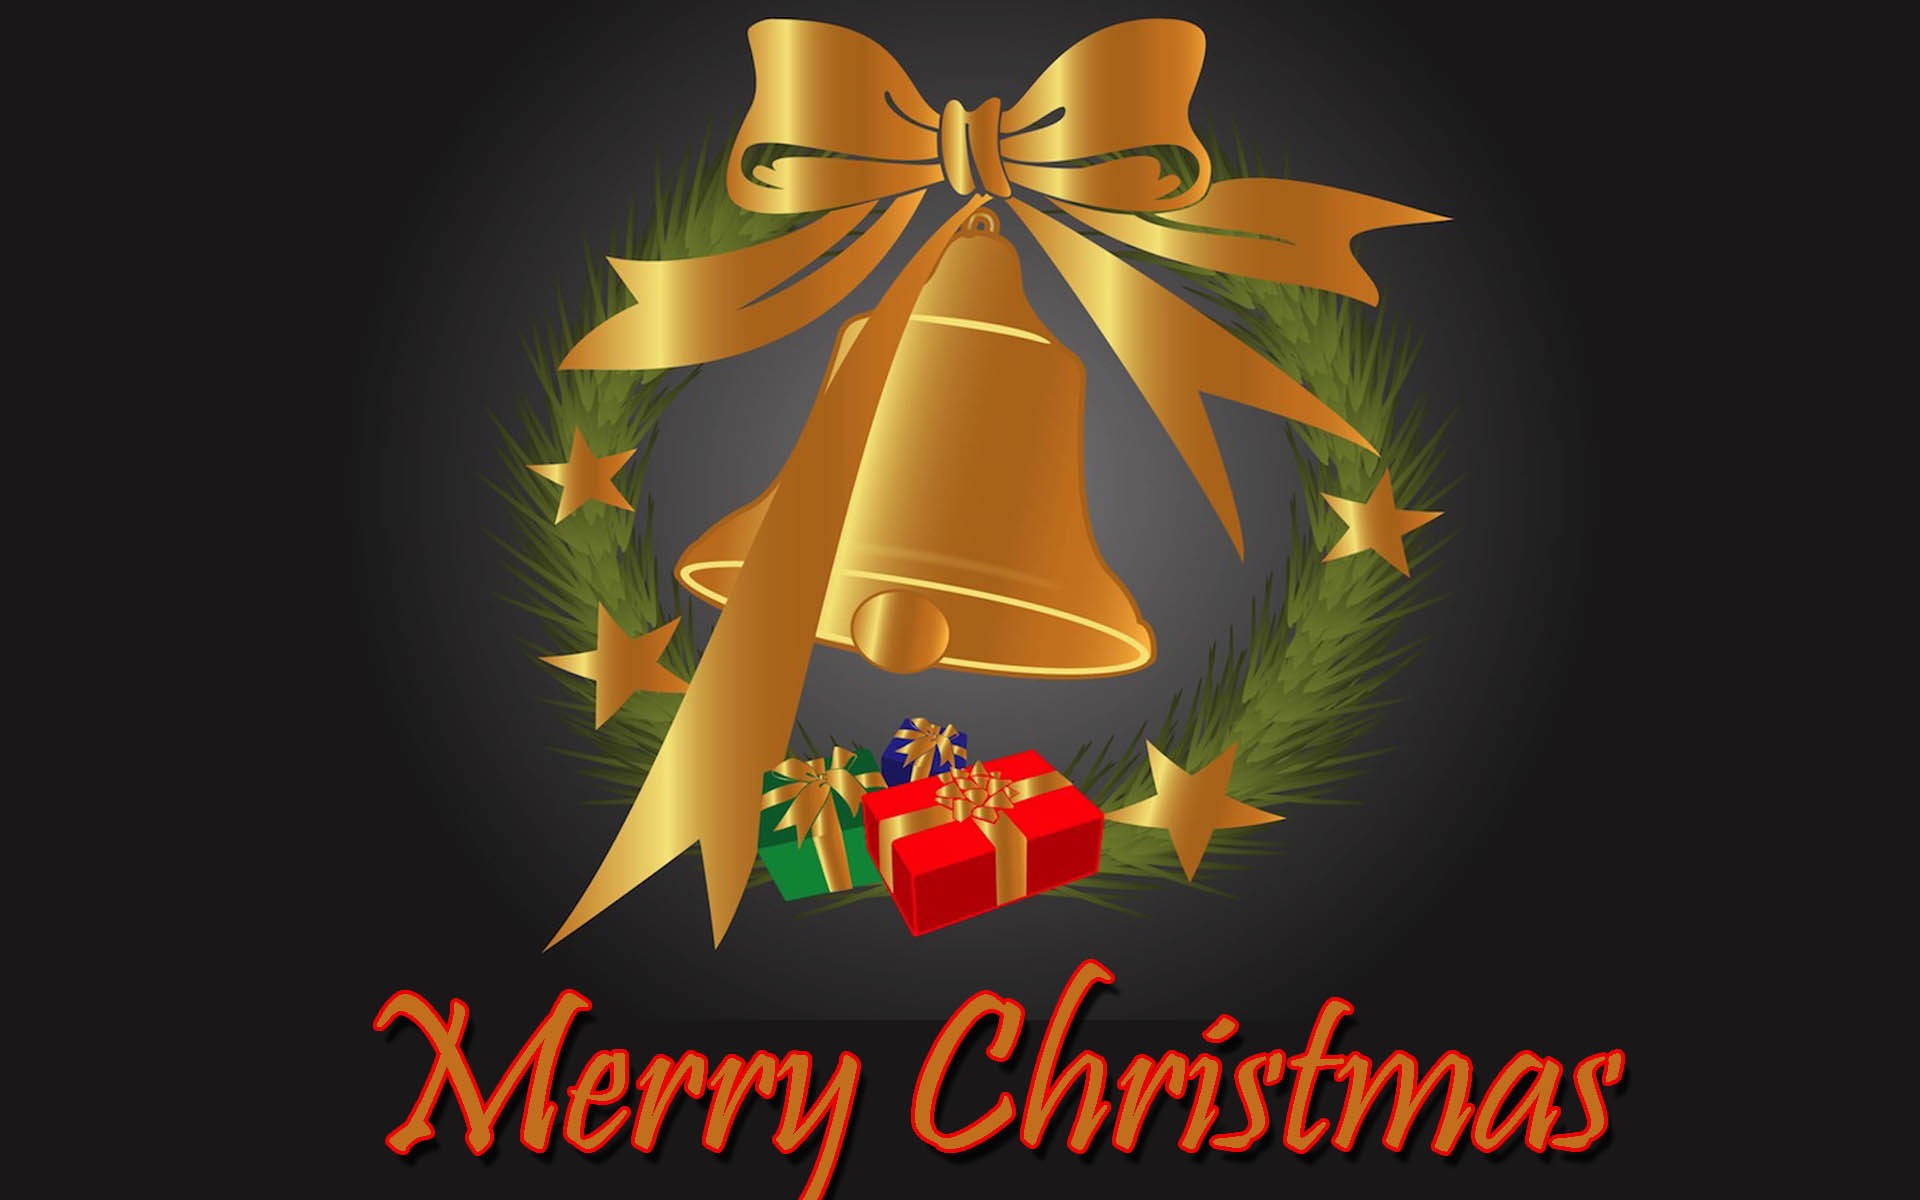 http://www.whatwallpapers.com/wp-content/uploads/2014/10/Merry-Christmas-2014-pics-download.jpg